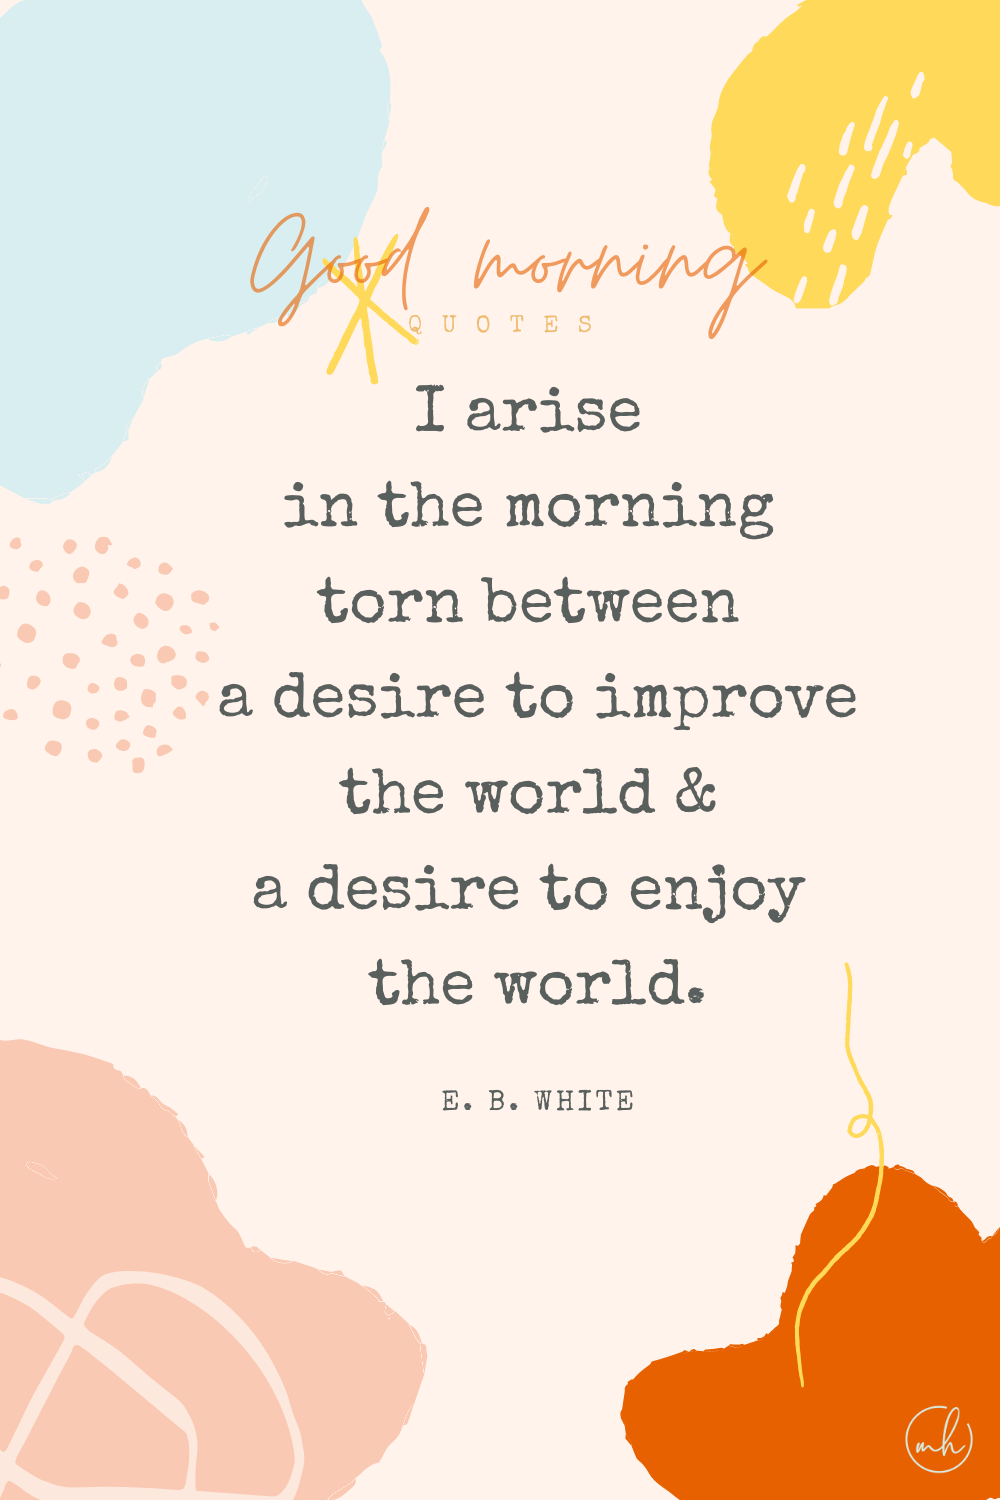 "I arise in the morning torn between a desire to improve the world and a desire to enjoy the world." – E. B. White